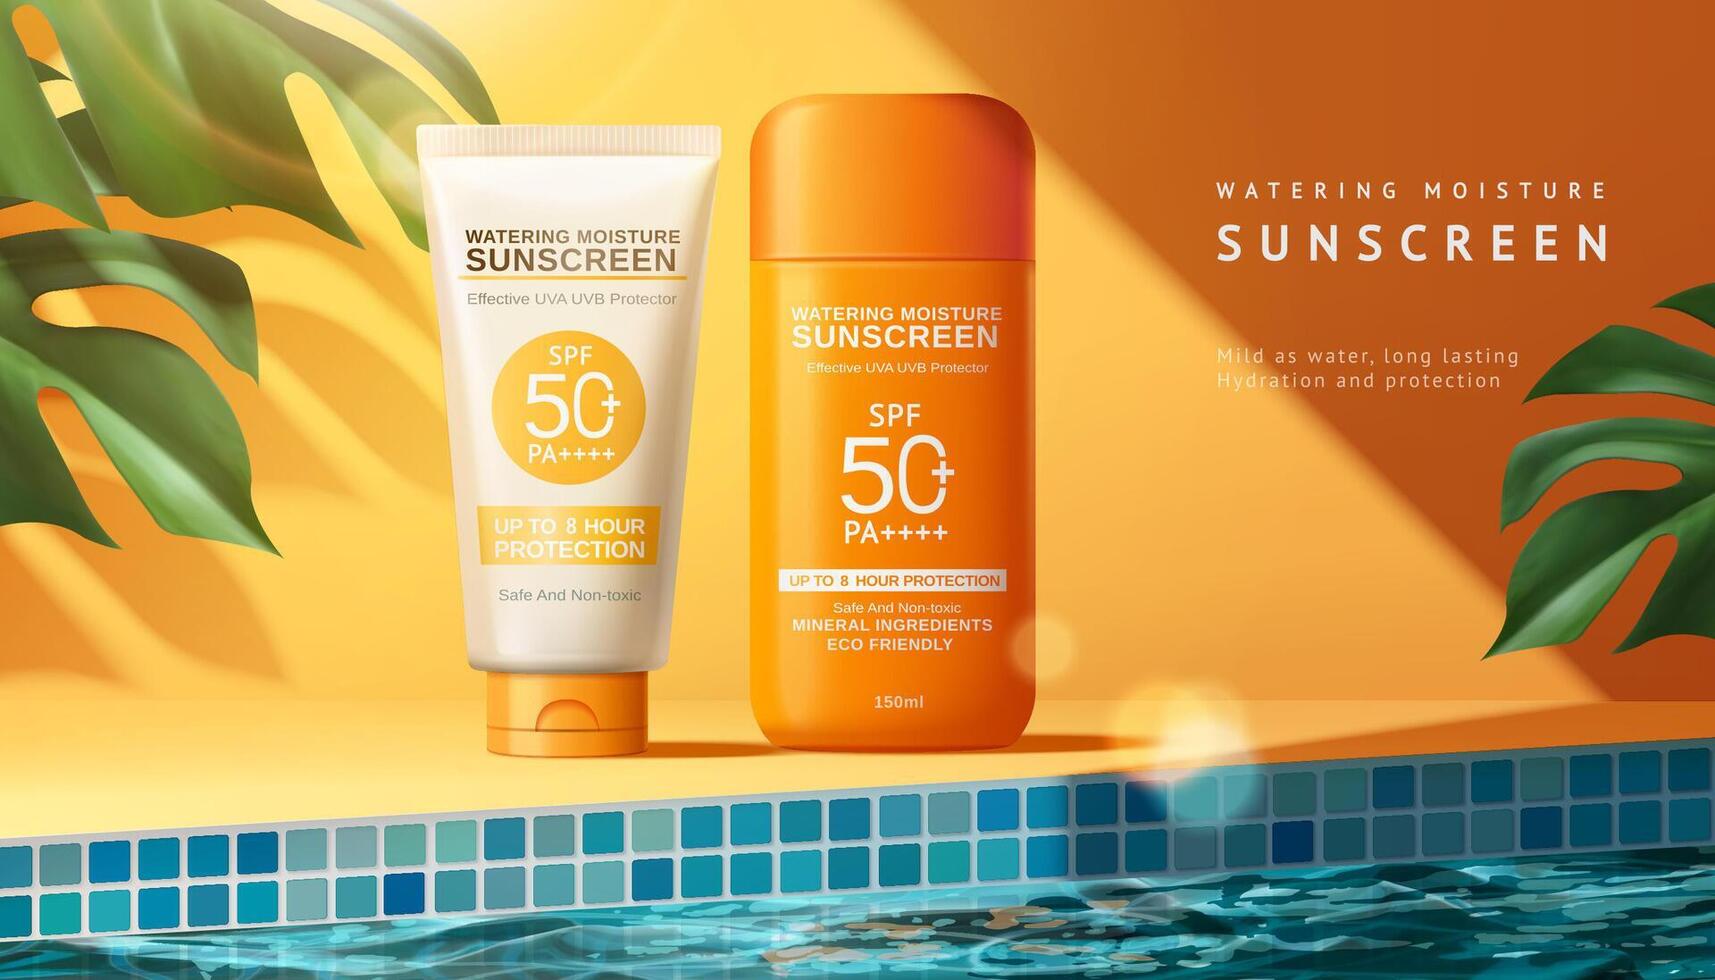 Sunscreen ad template with monstera leaves and swimming pool scene design, 3d illustration vector